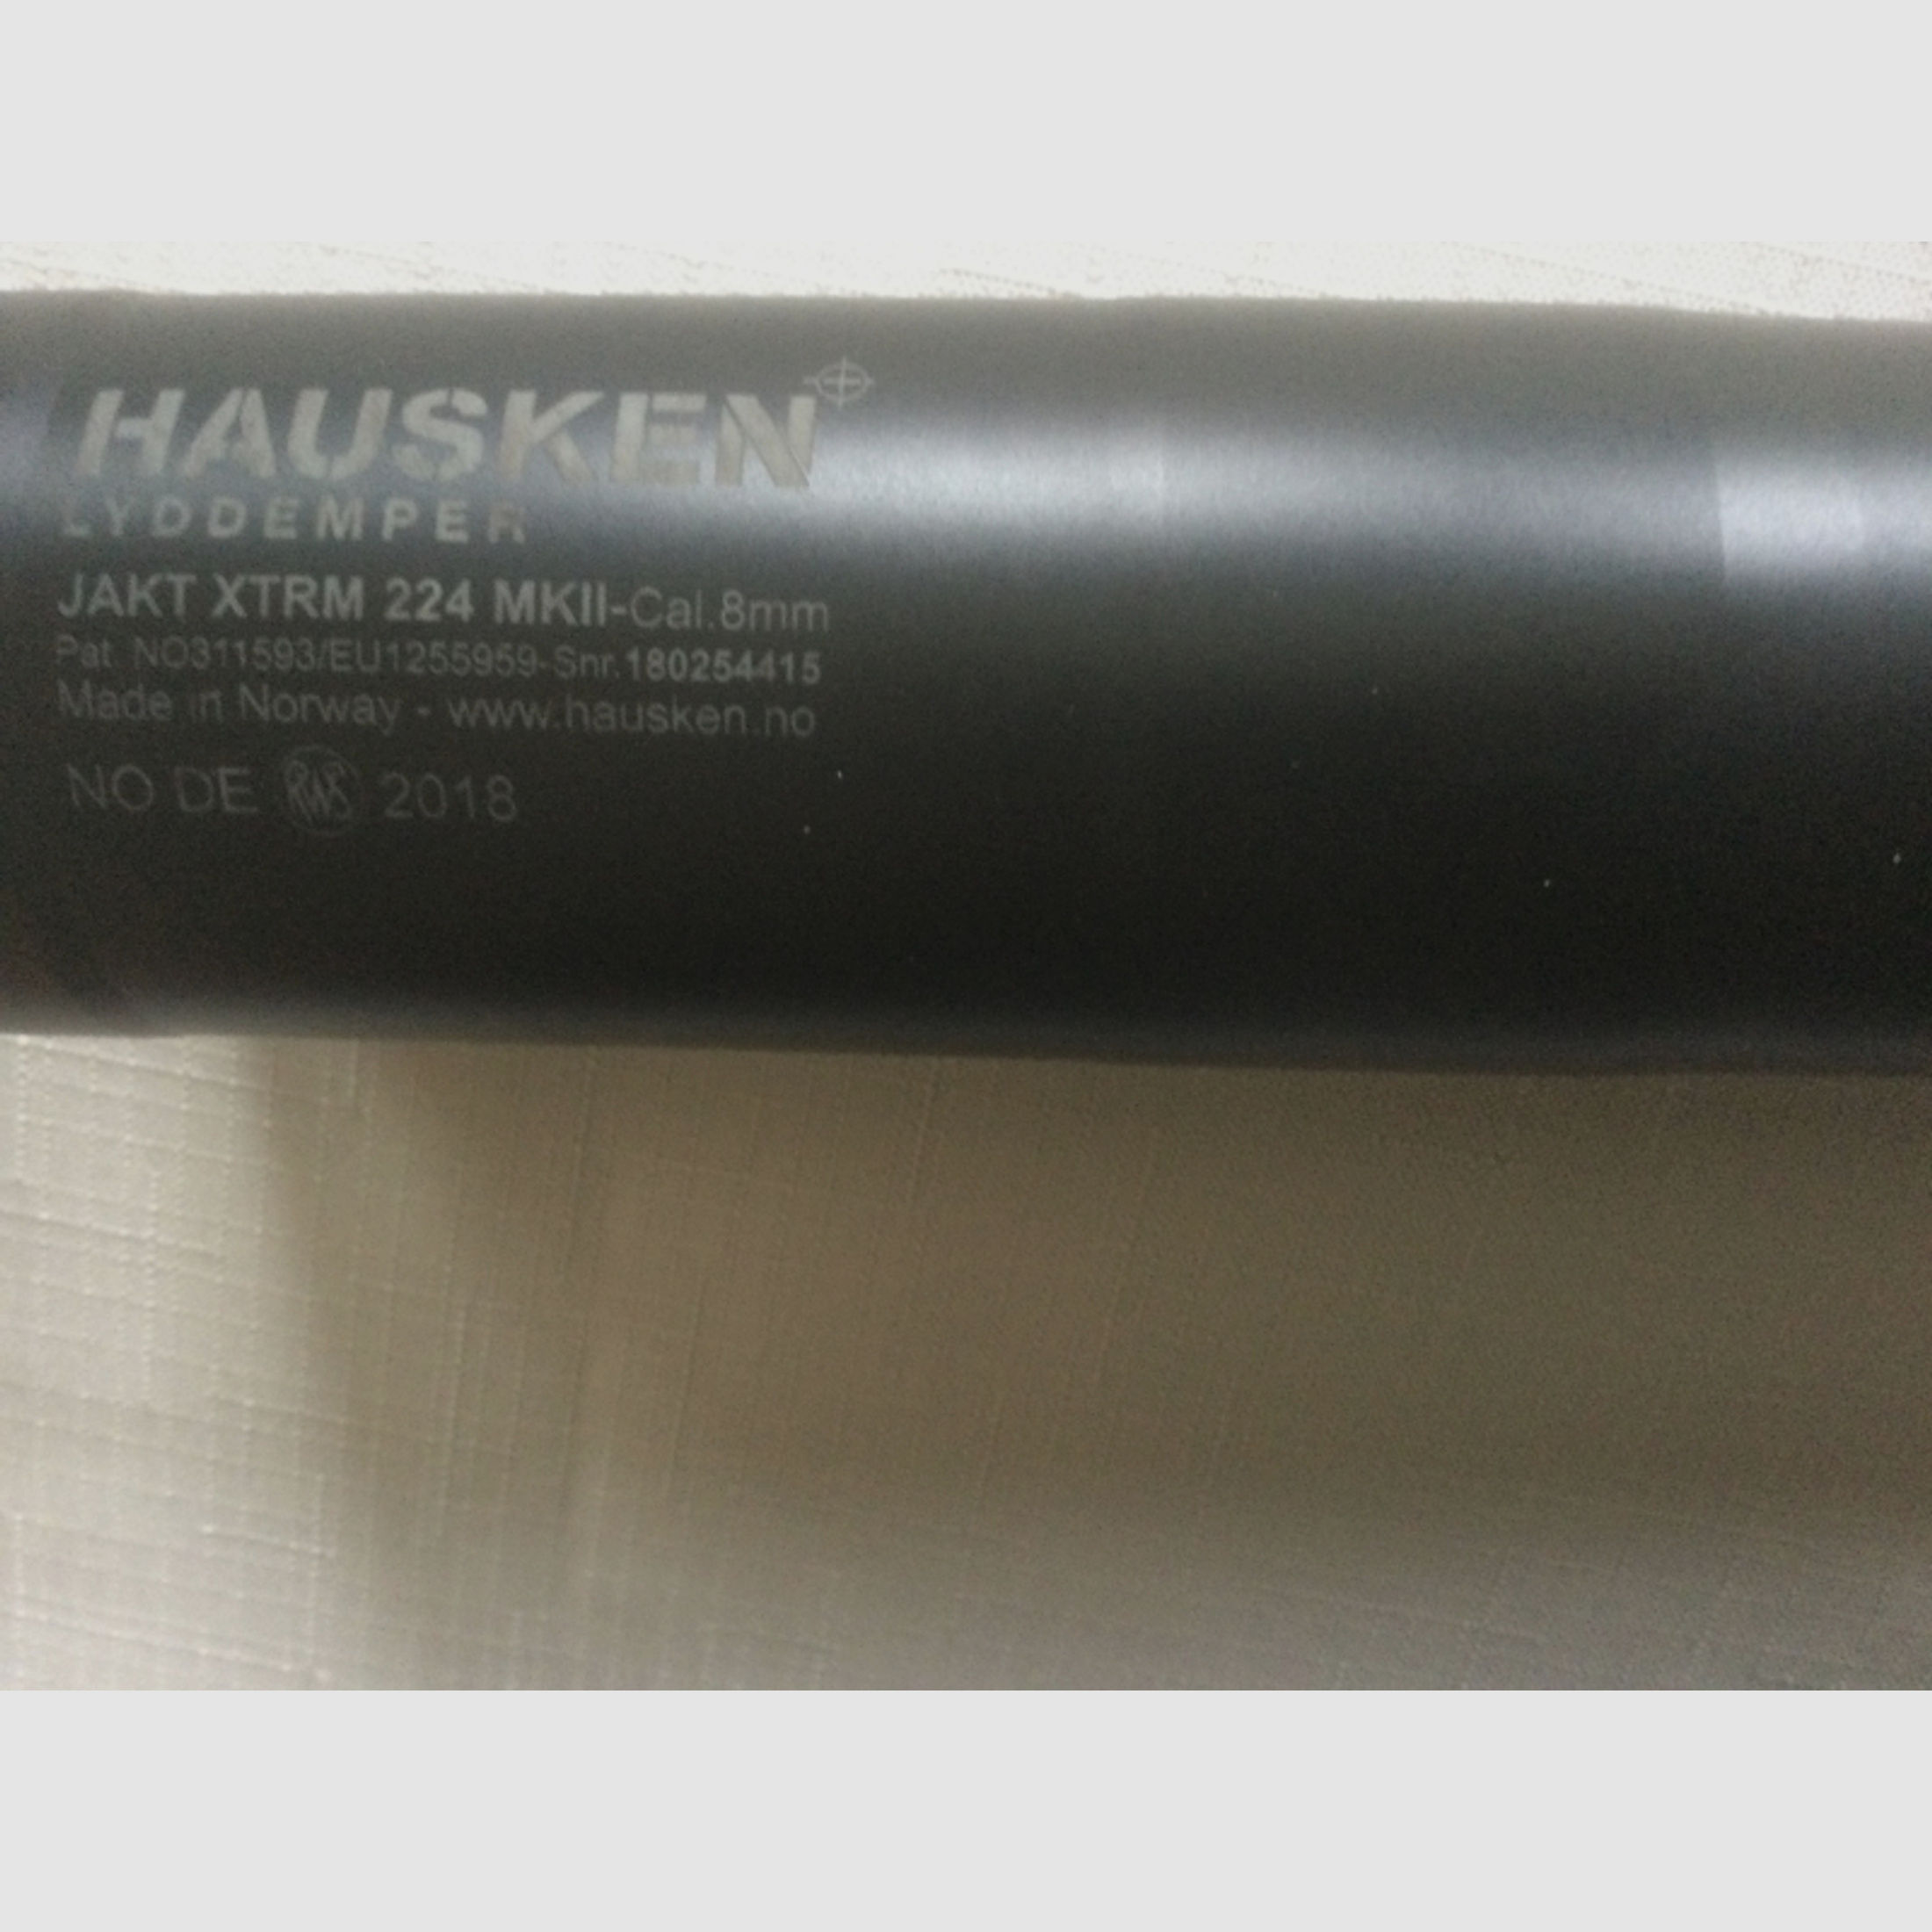 Hauskens SD JD 224 XTREM 8 mm S